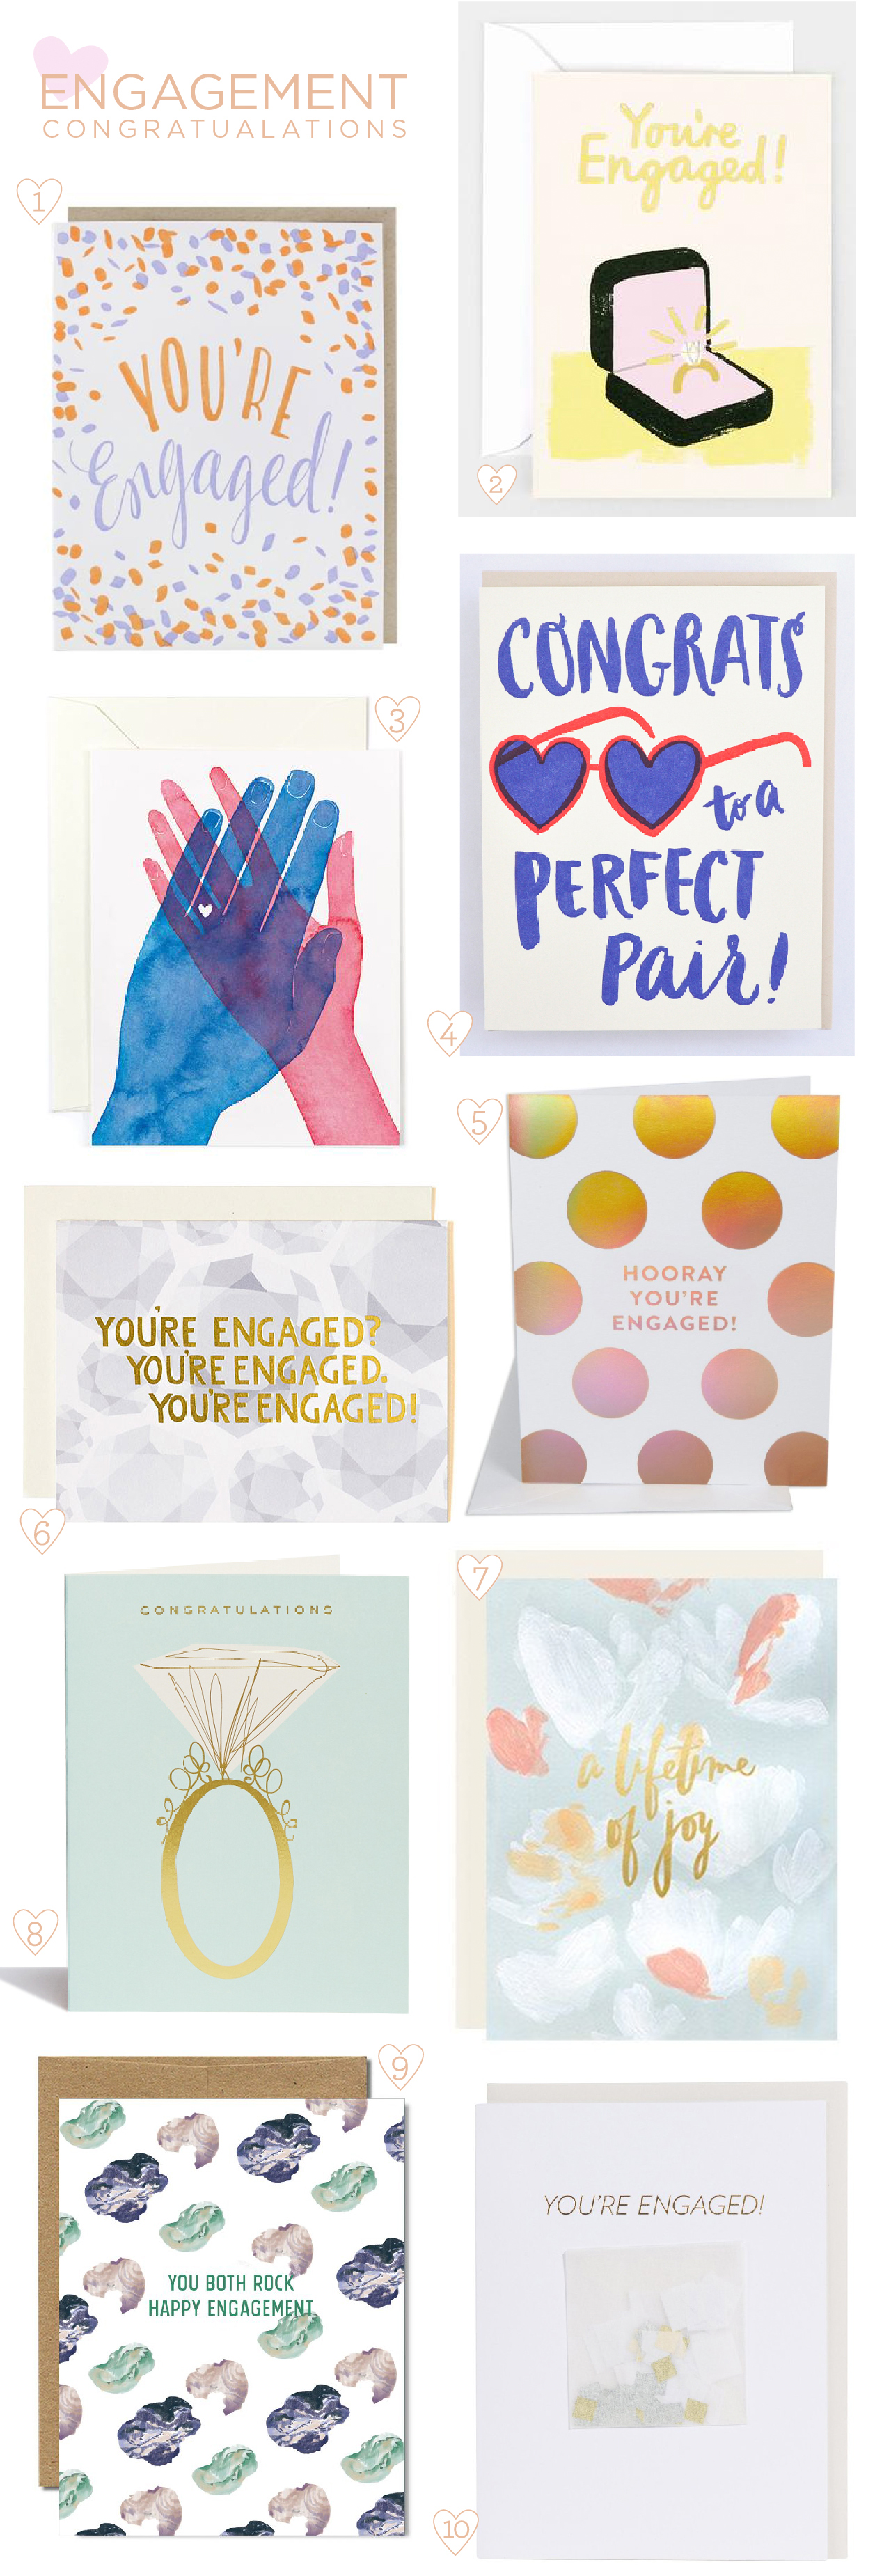 Engagement Congratulations Card Round Up